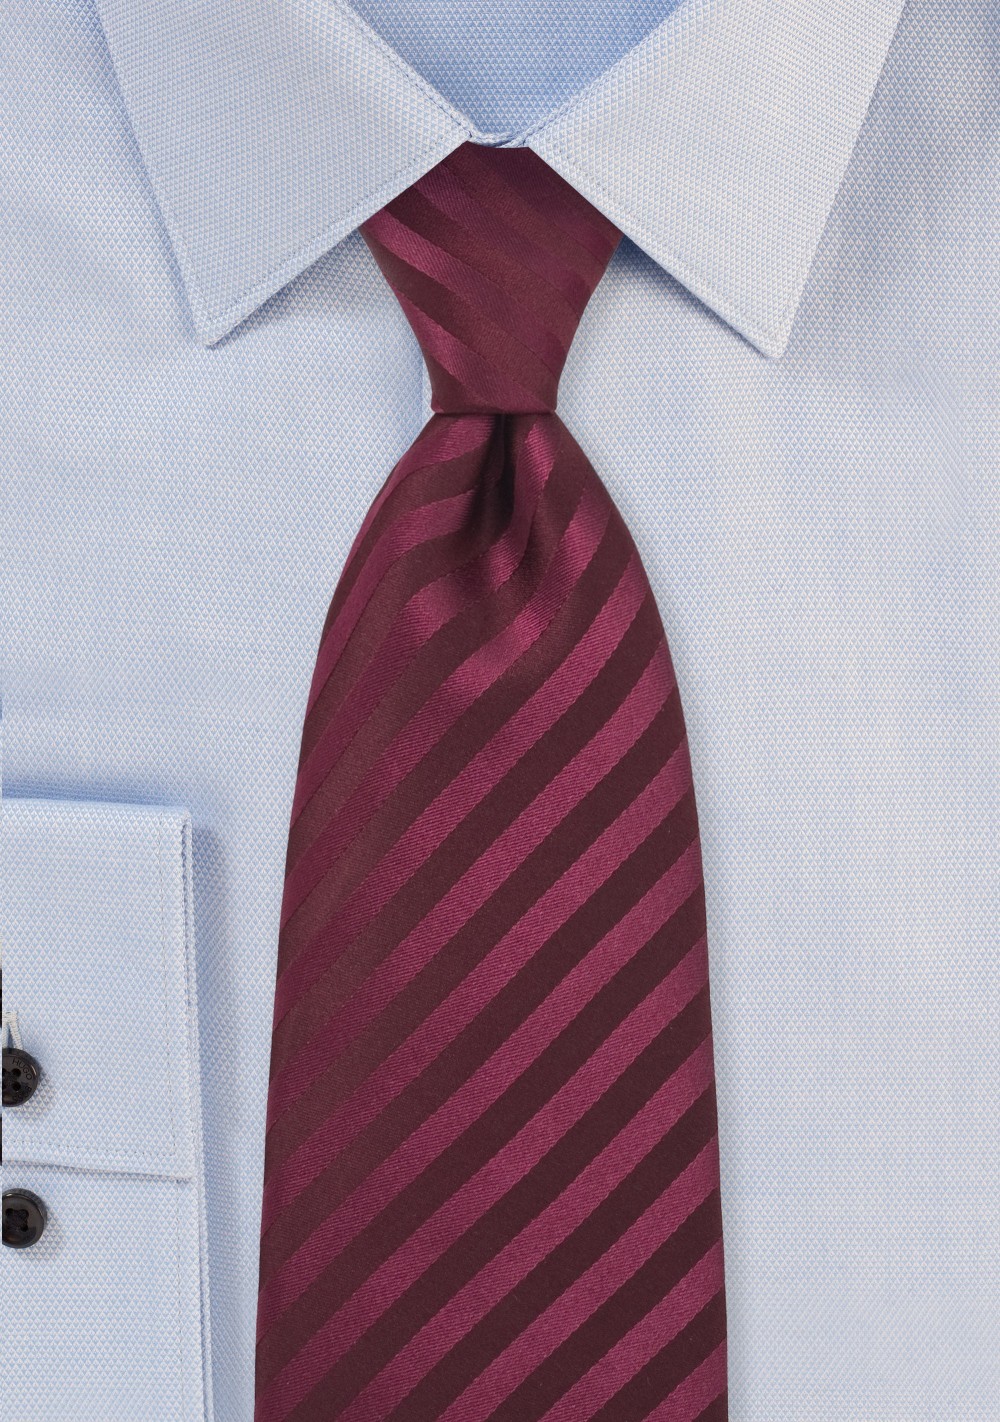 Extra long solid color tie - Stain resistant microfiber tie in burgundy red